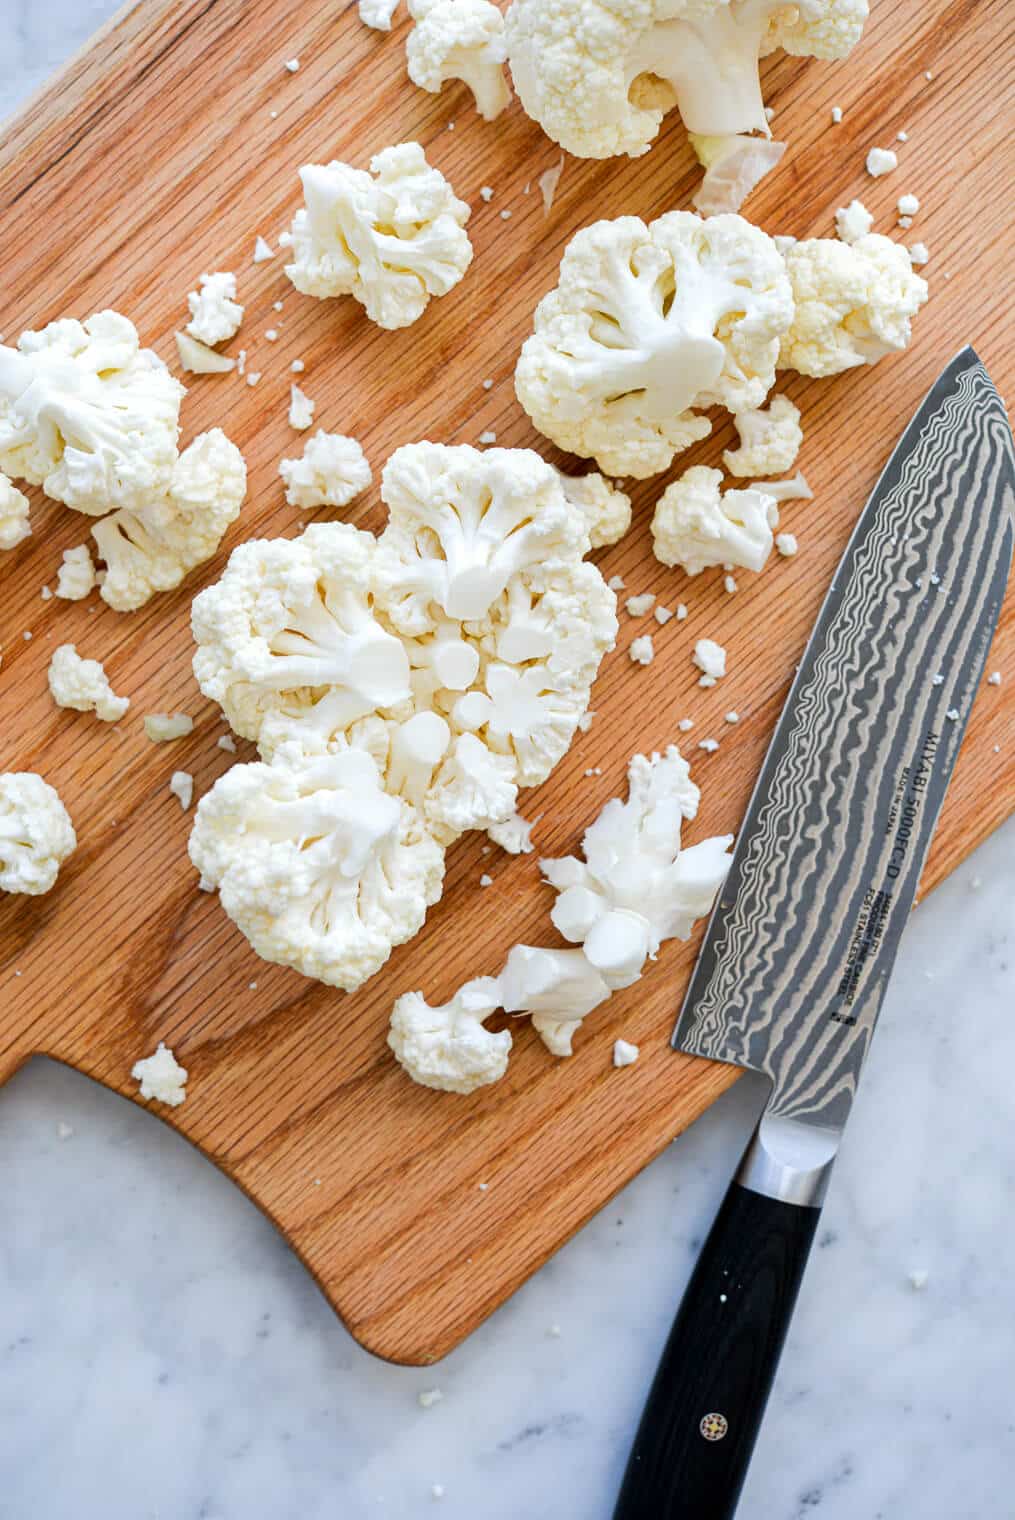 Wooden cutting board with cut cauliflower florets and chef's know with black handle sitting on grey and white marble countertop